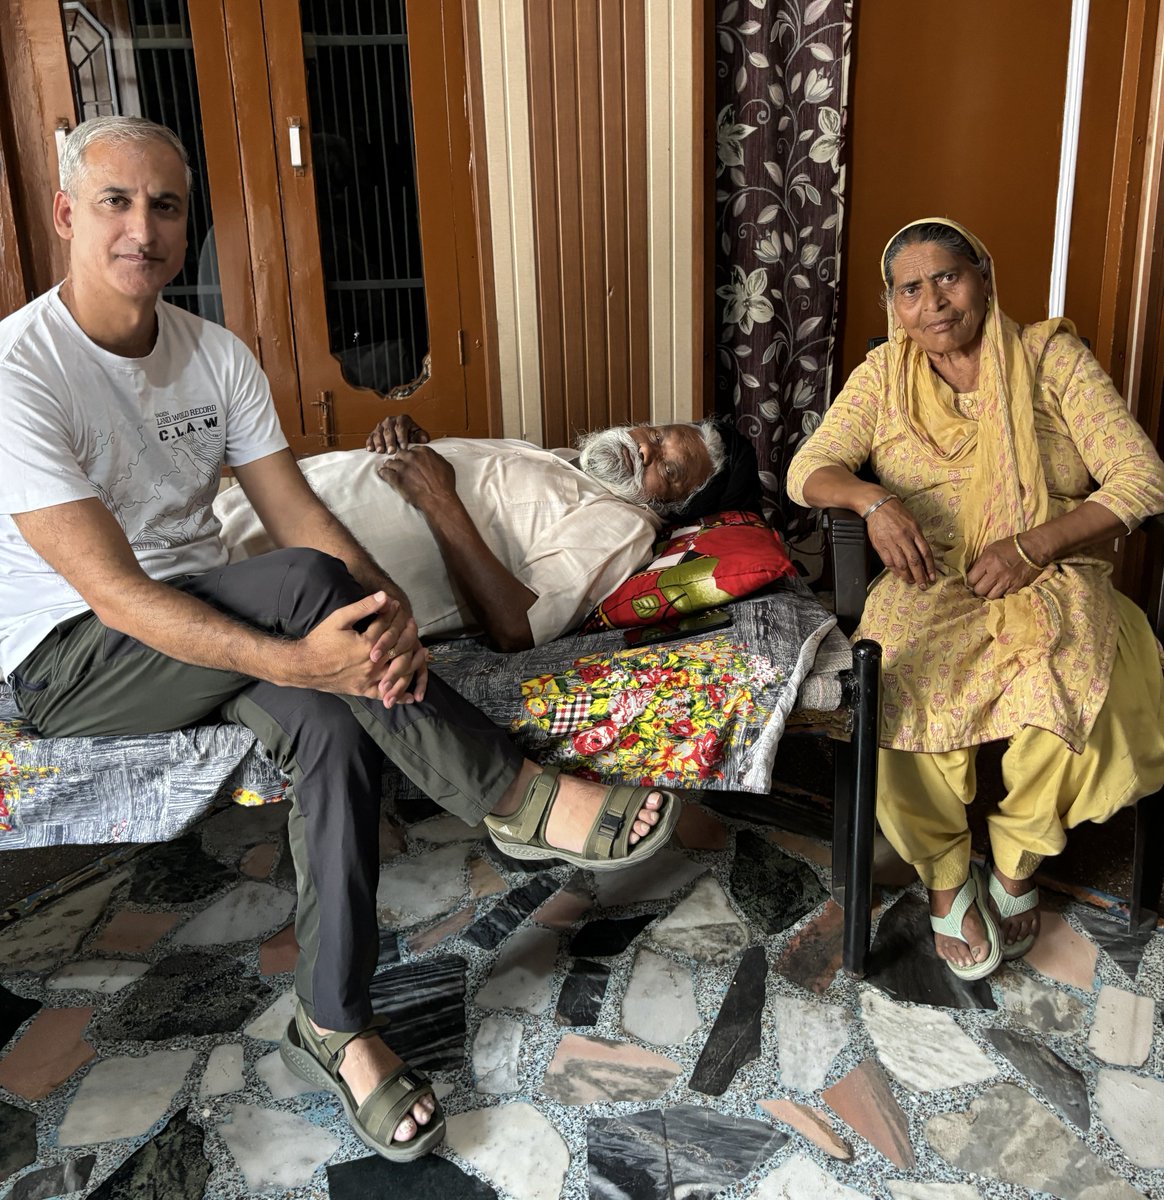 Today visited Sardar Gurnam Singh, who suffered a minor attack a few days ago. He is recovering well. His son SEPOY BALWINDER SINGH 8 SIKH #IndianArmy was immortalized fighting pakis in #KargilWar in 1999. Though son served only 18 months, parents are still in touch with Unit.